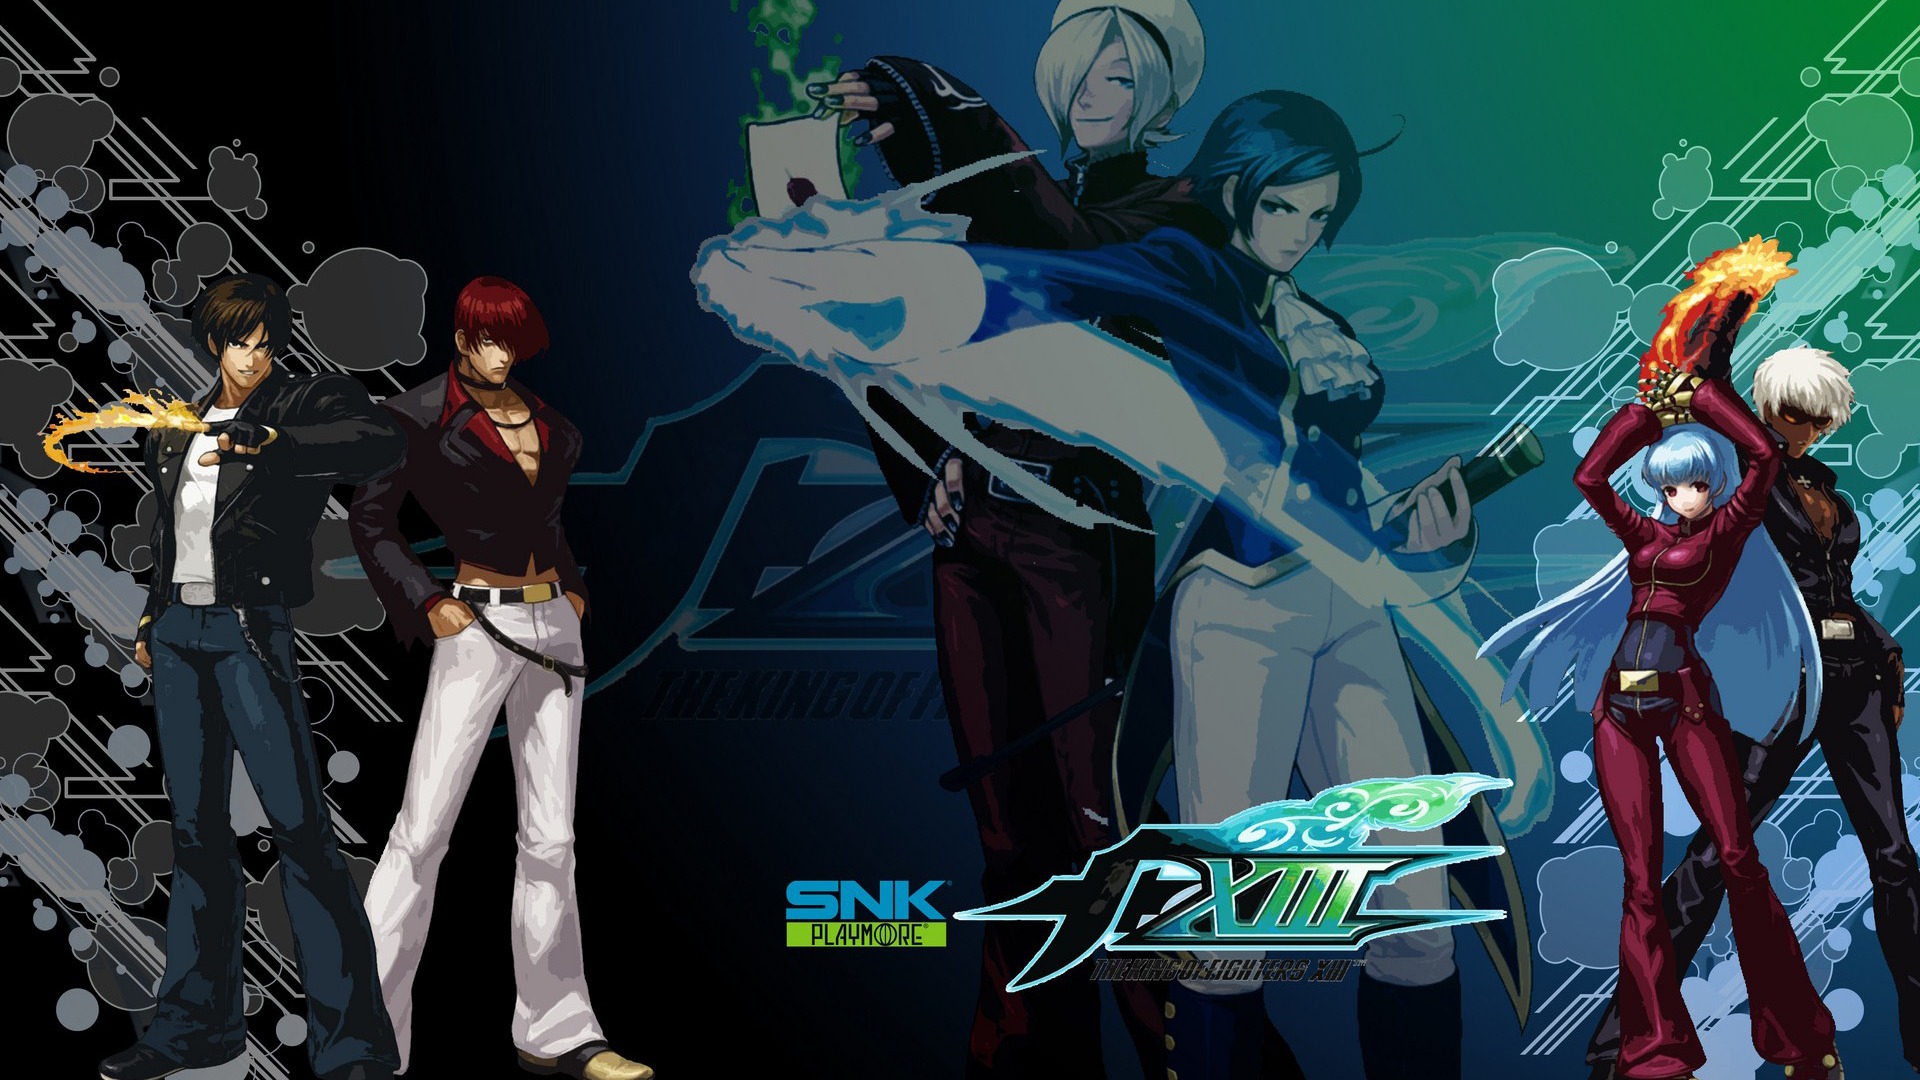 Le roi de wallpapers Fighters XIII #4 - 1920x1080